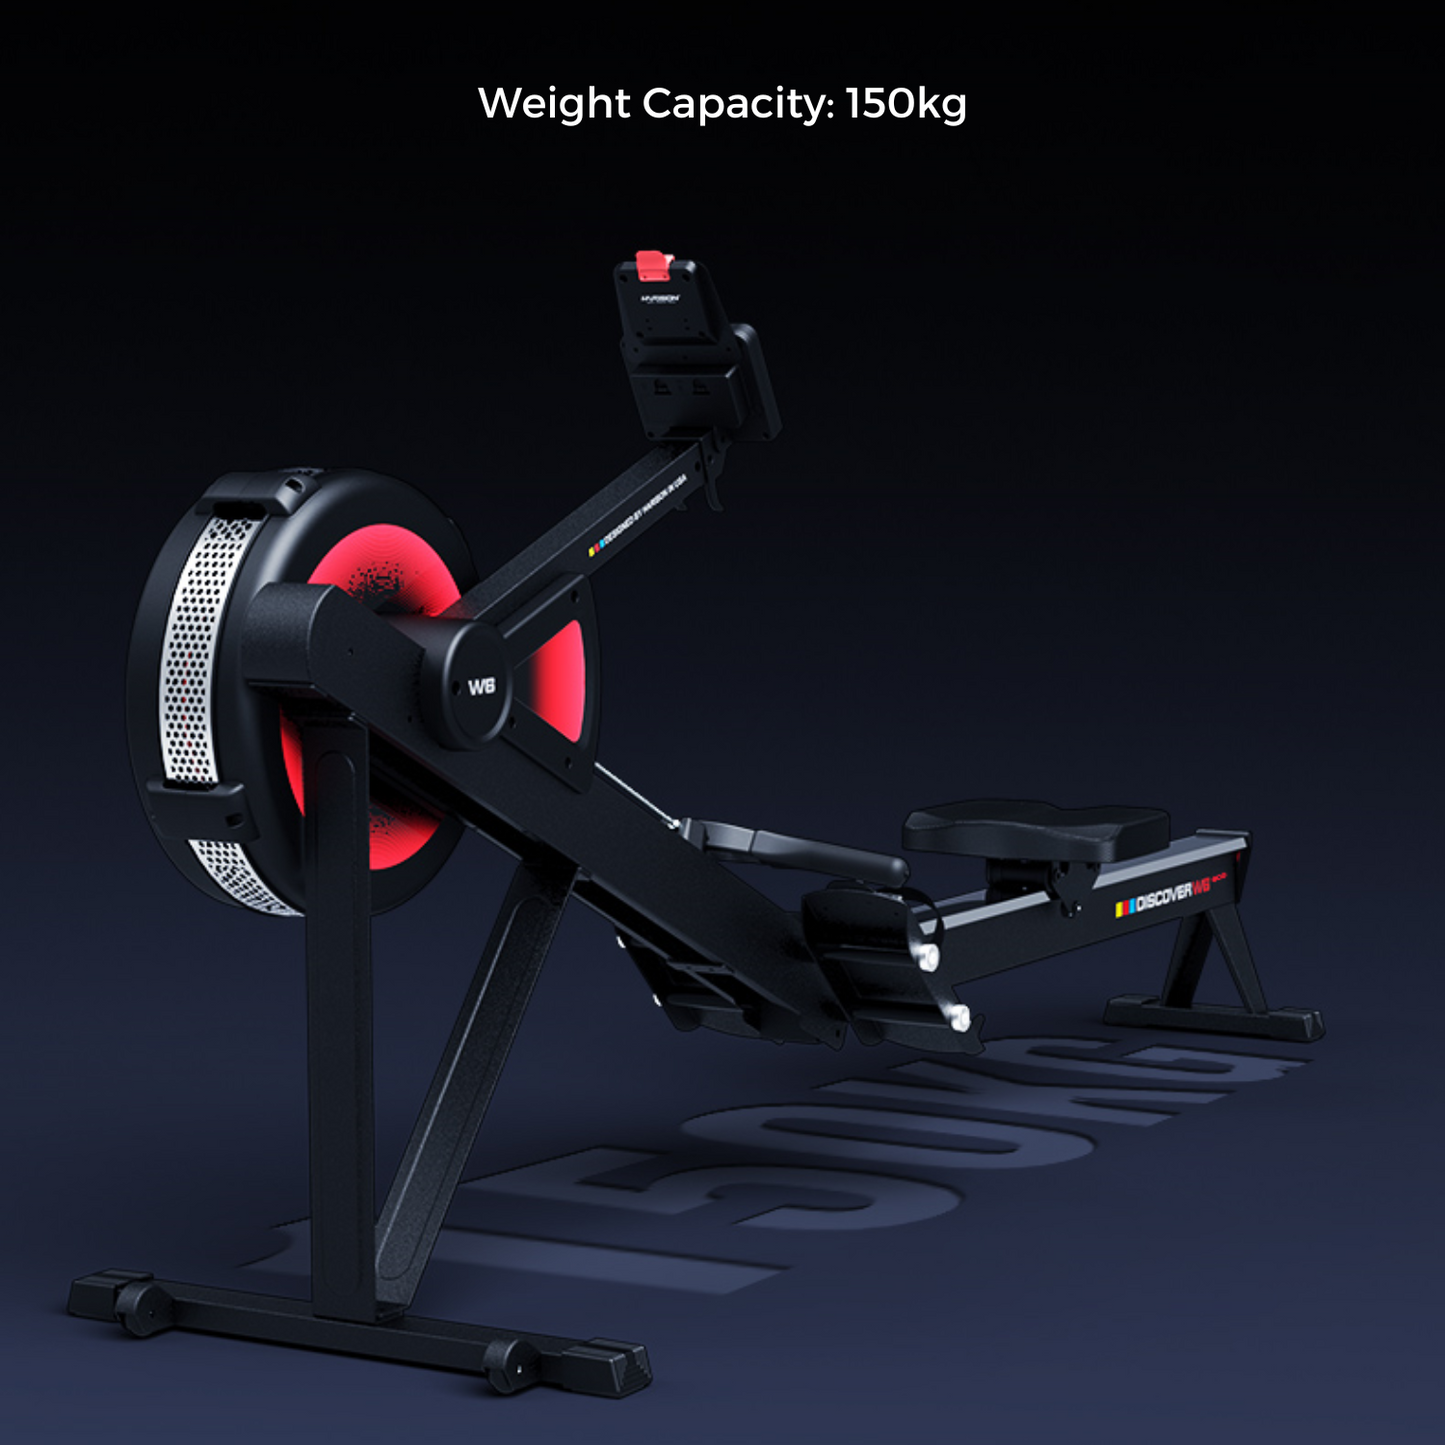 HARISON DISCOVER W6 Air Rowing Machine-Gym Direct